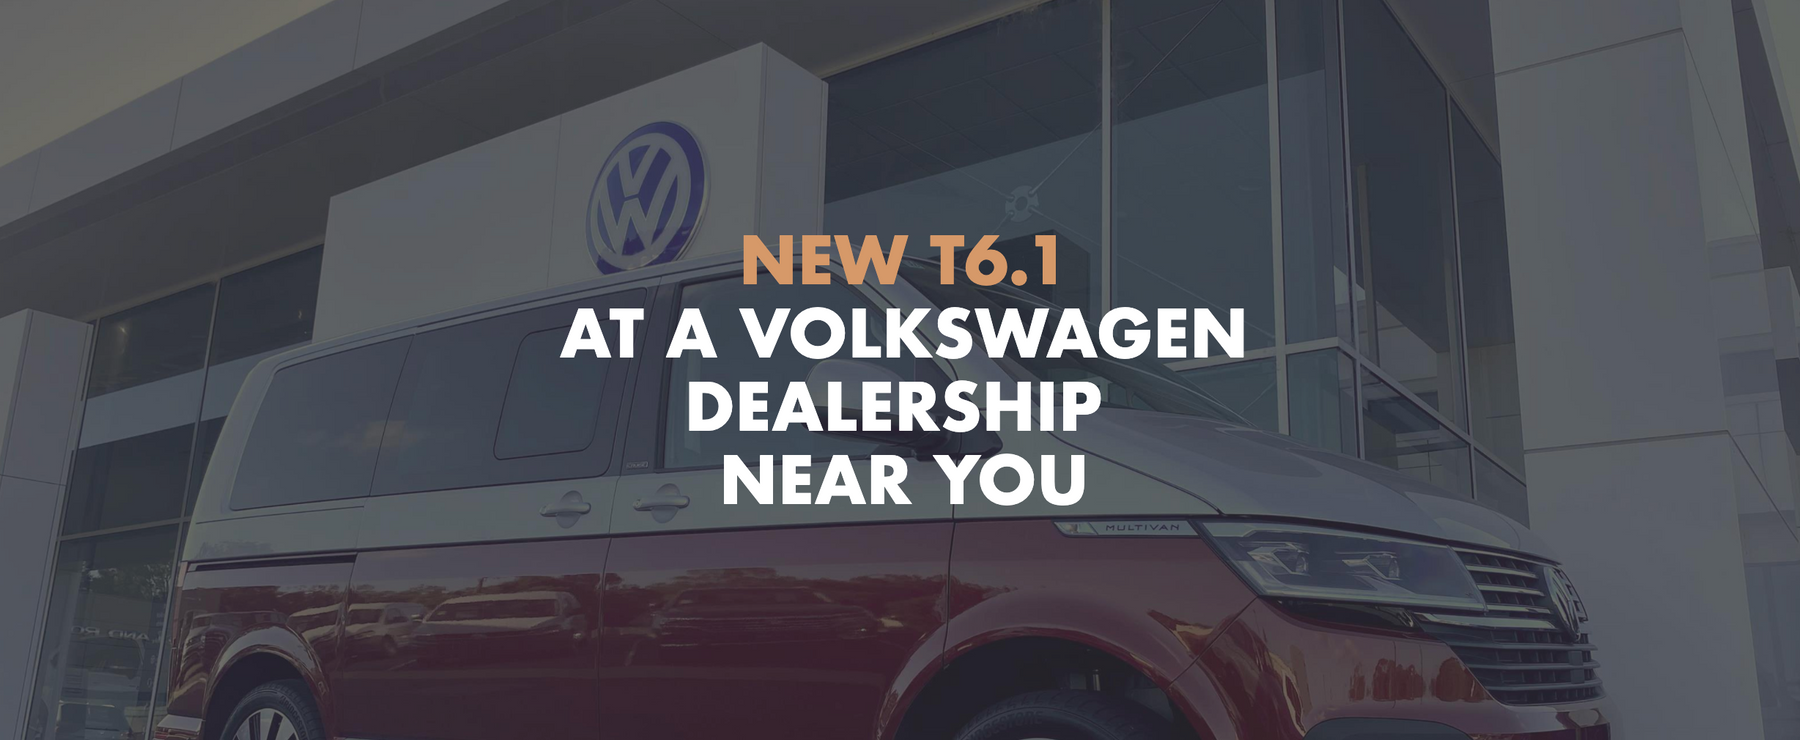 New T6.1 at a Volkswagen Dealership near you